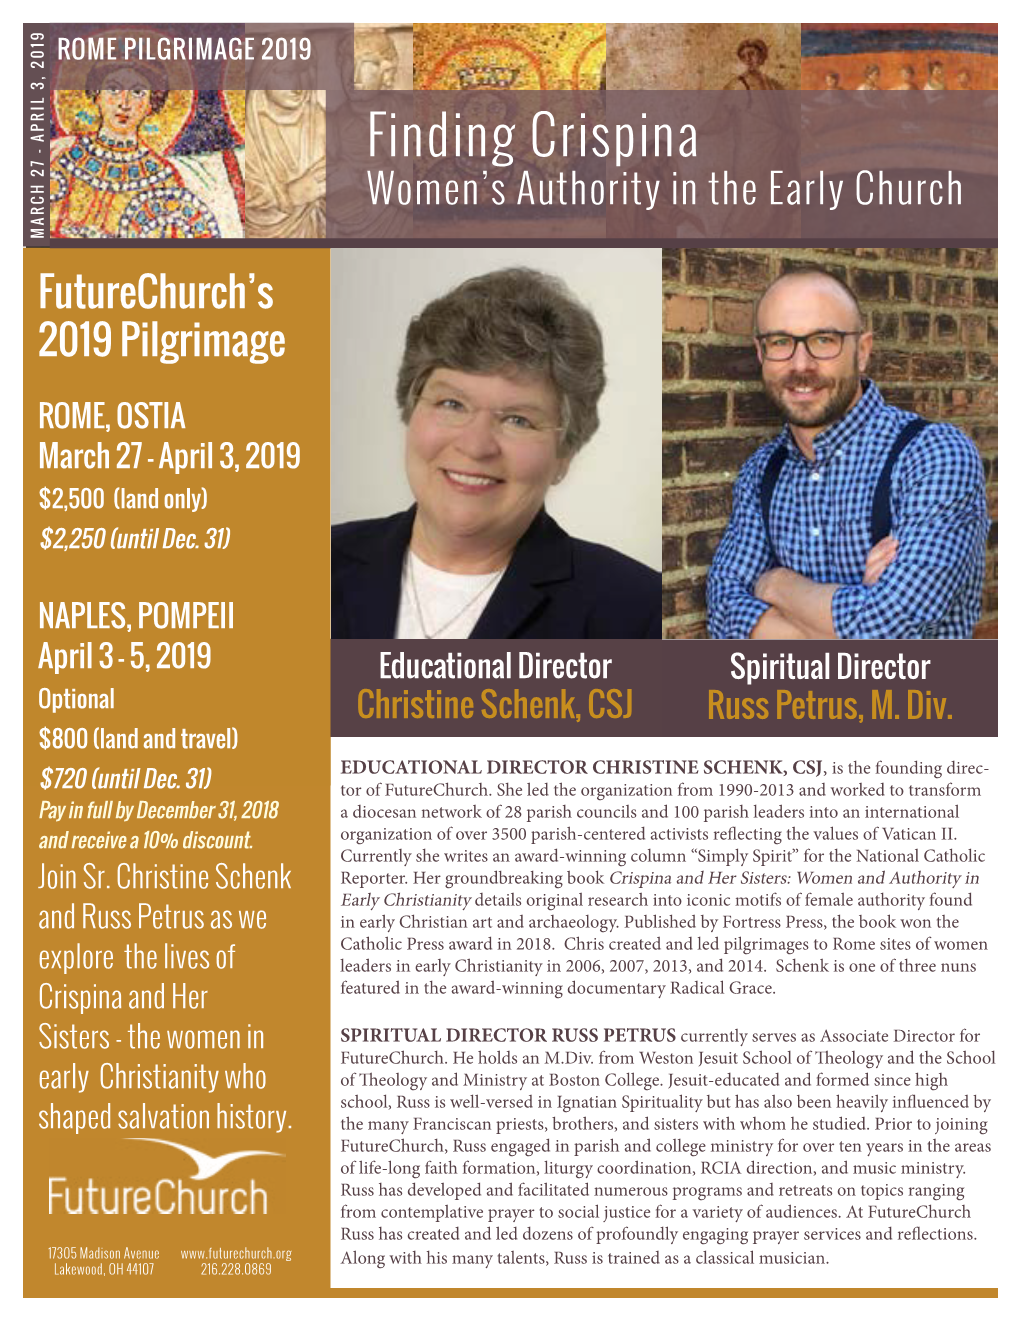 Finding Crispina Women’S Authority in the Early Church MARCH 27 - APRIL 3, 2019 27 - MARCH